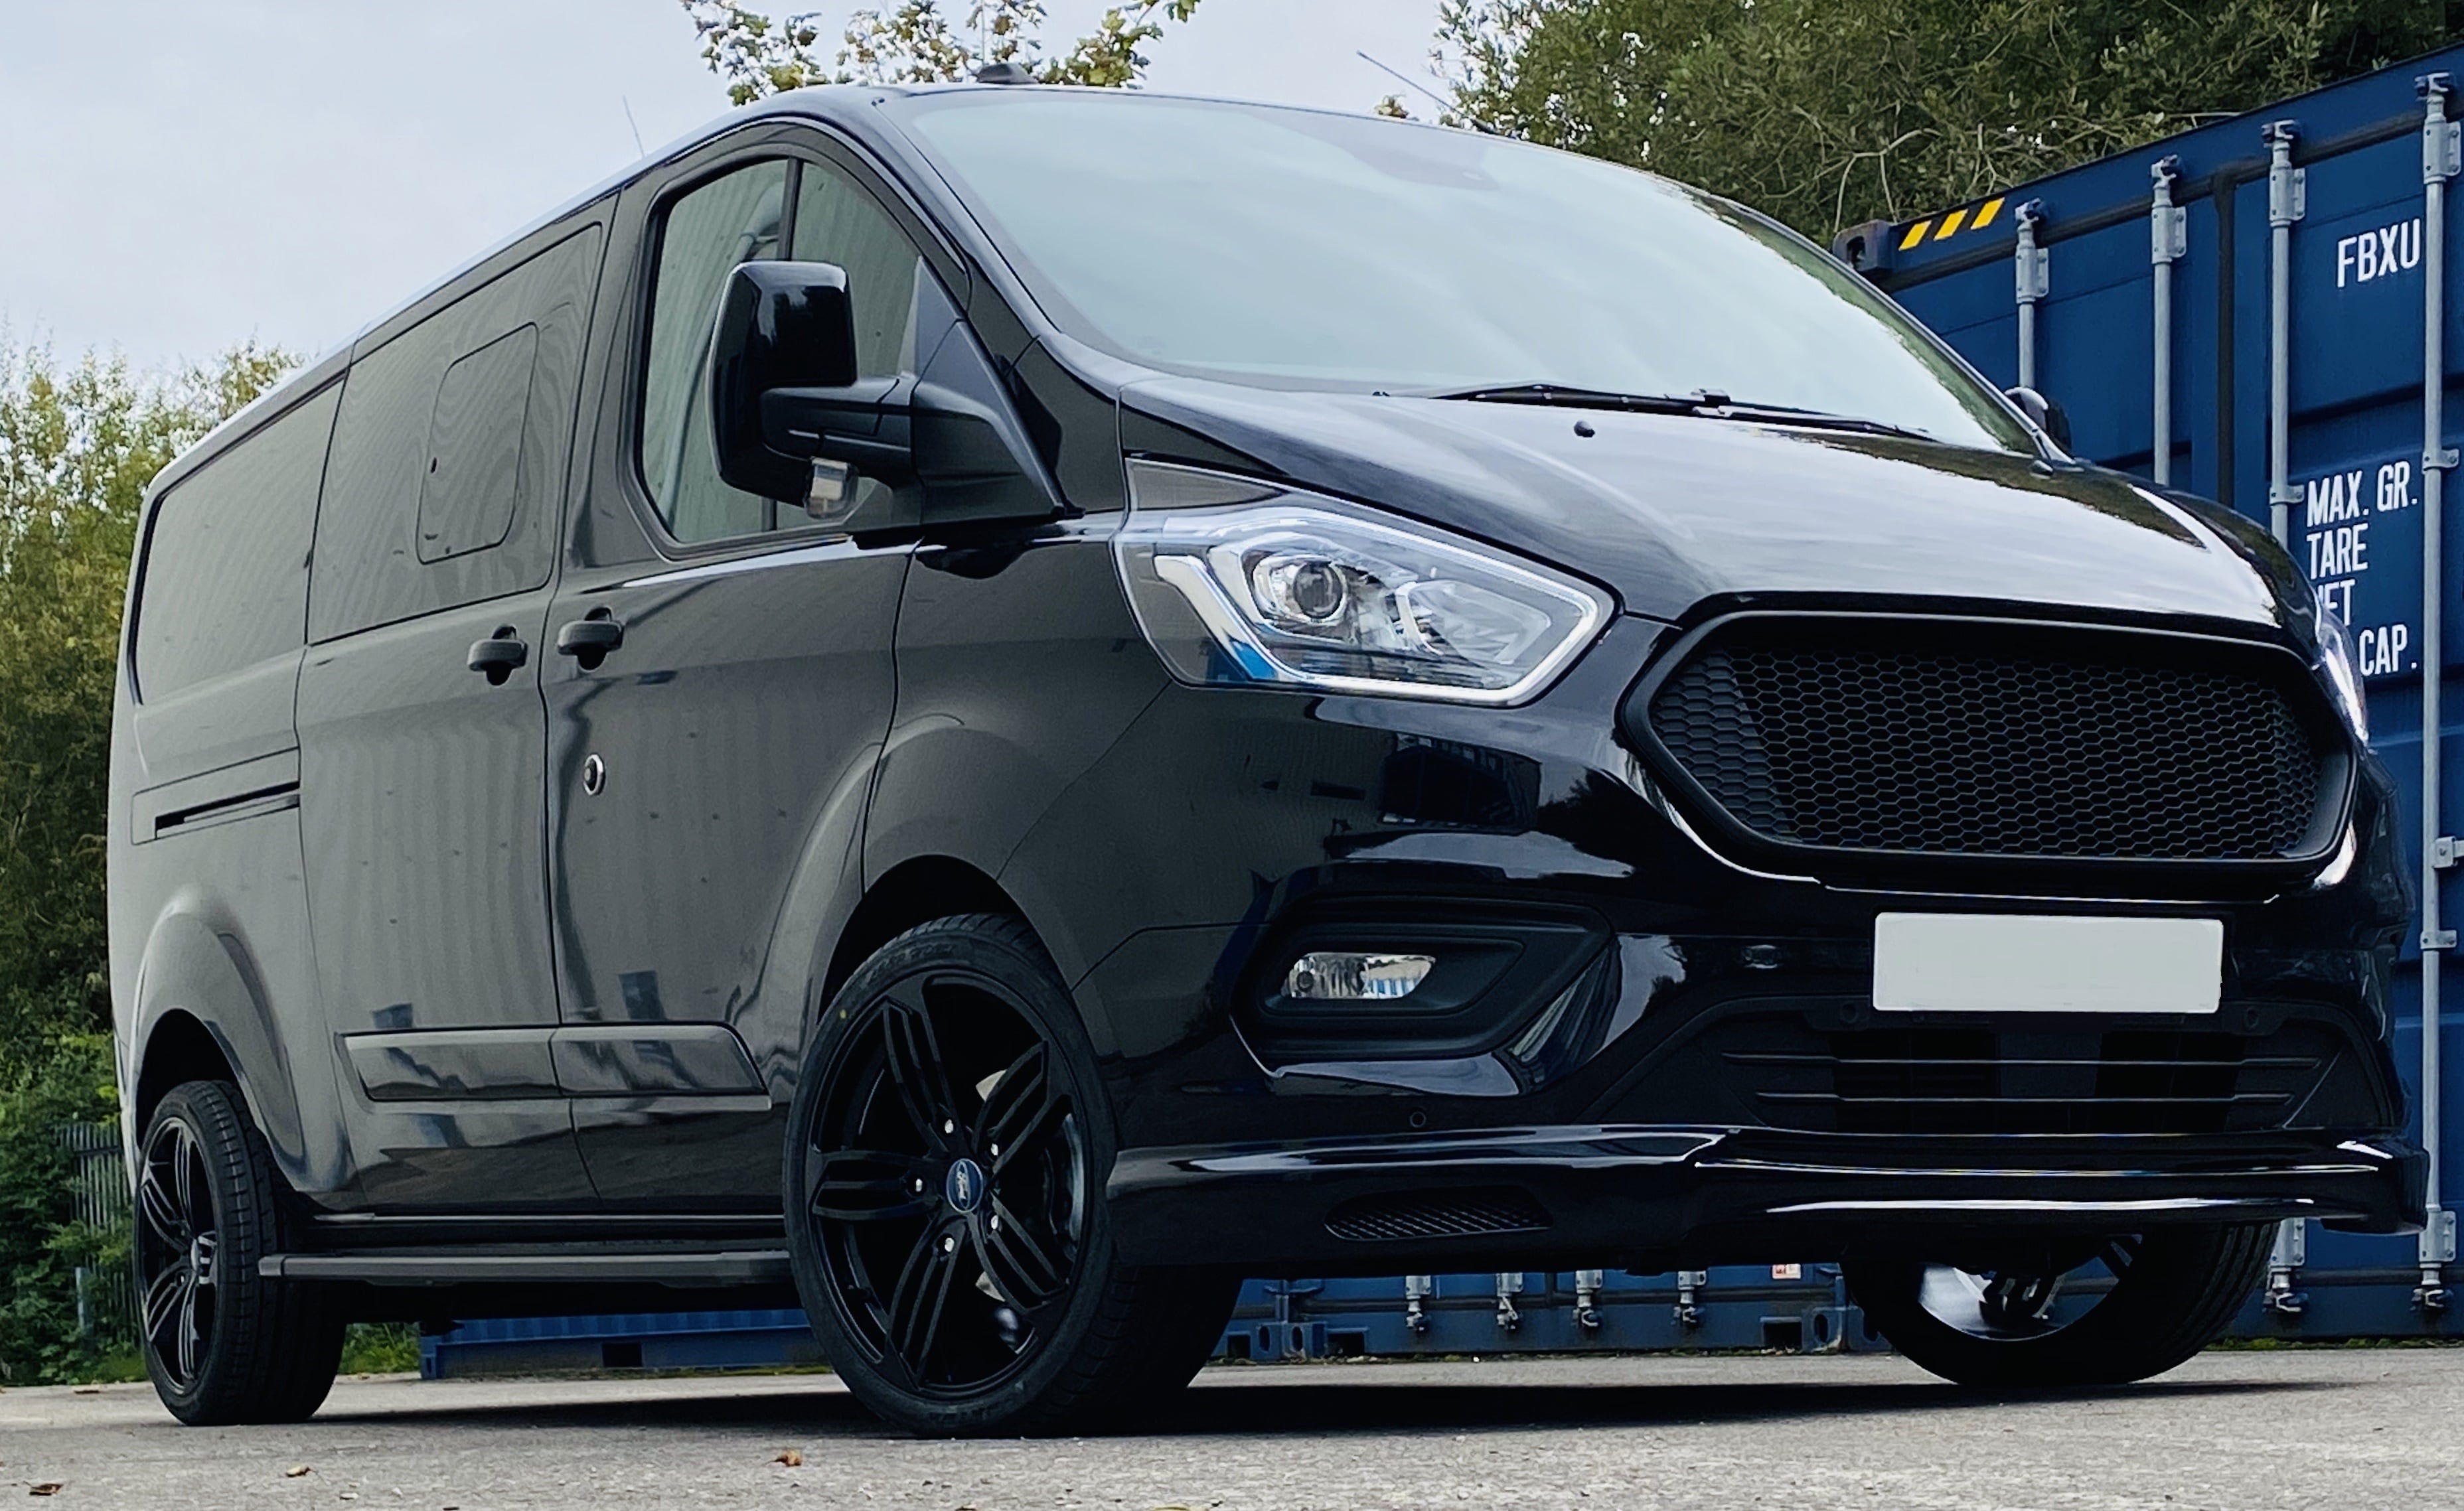 Ford Custom DCIV 185ps Auto Q Sport Black Edition Blank Grille by Quadrant Vehicles